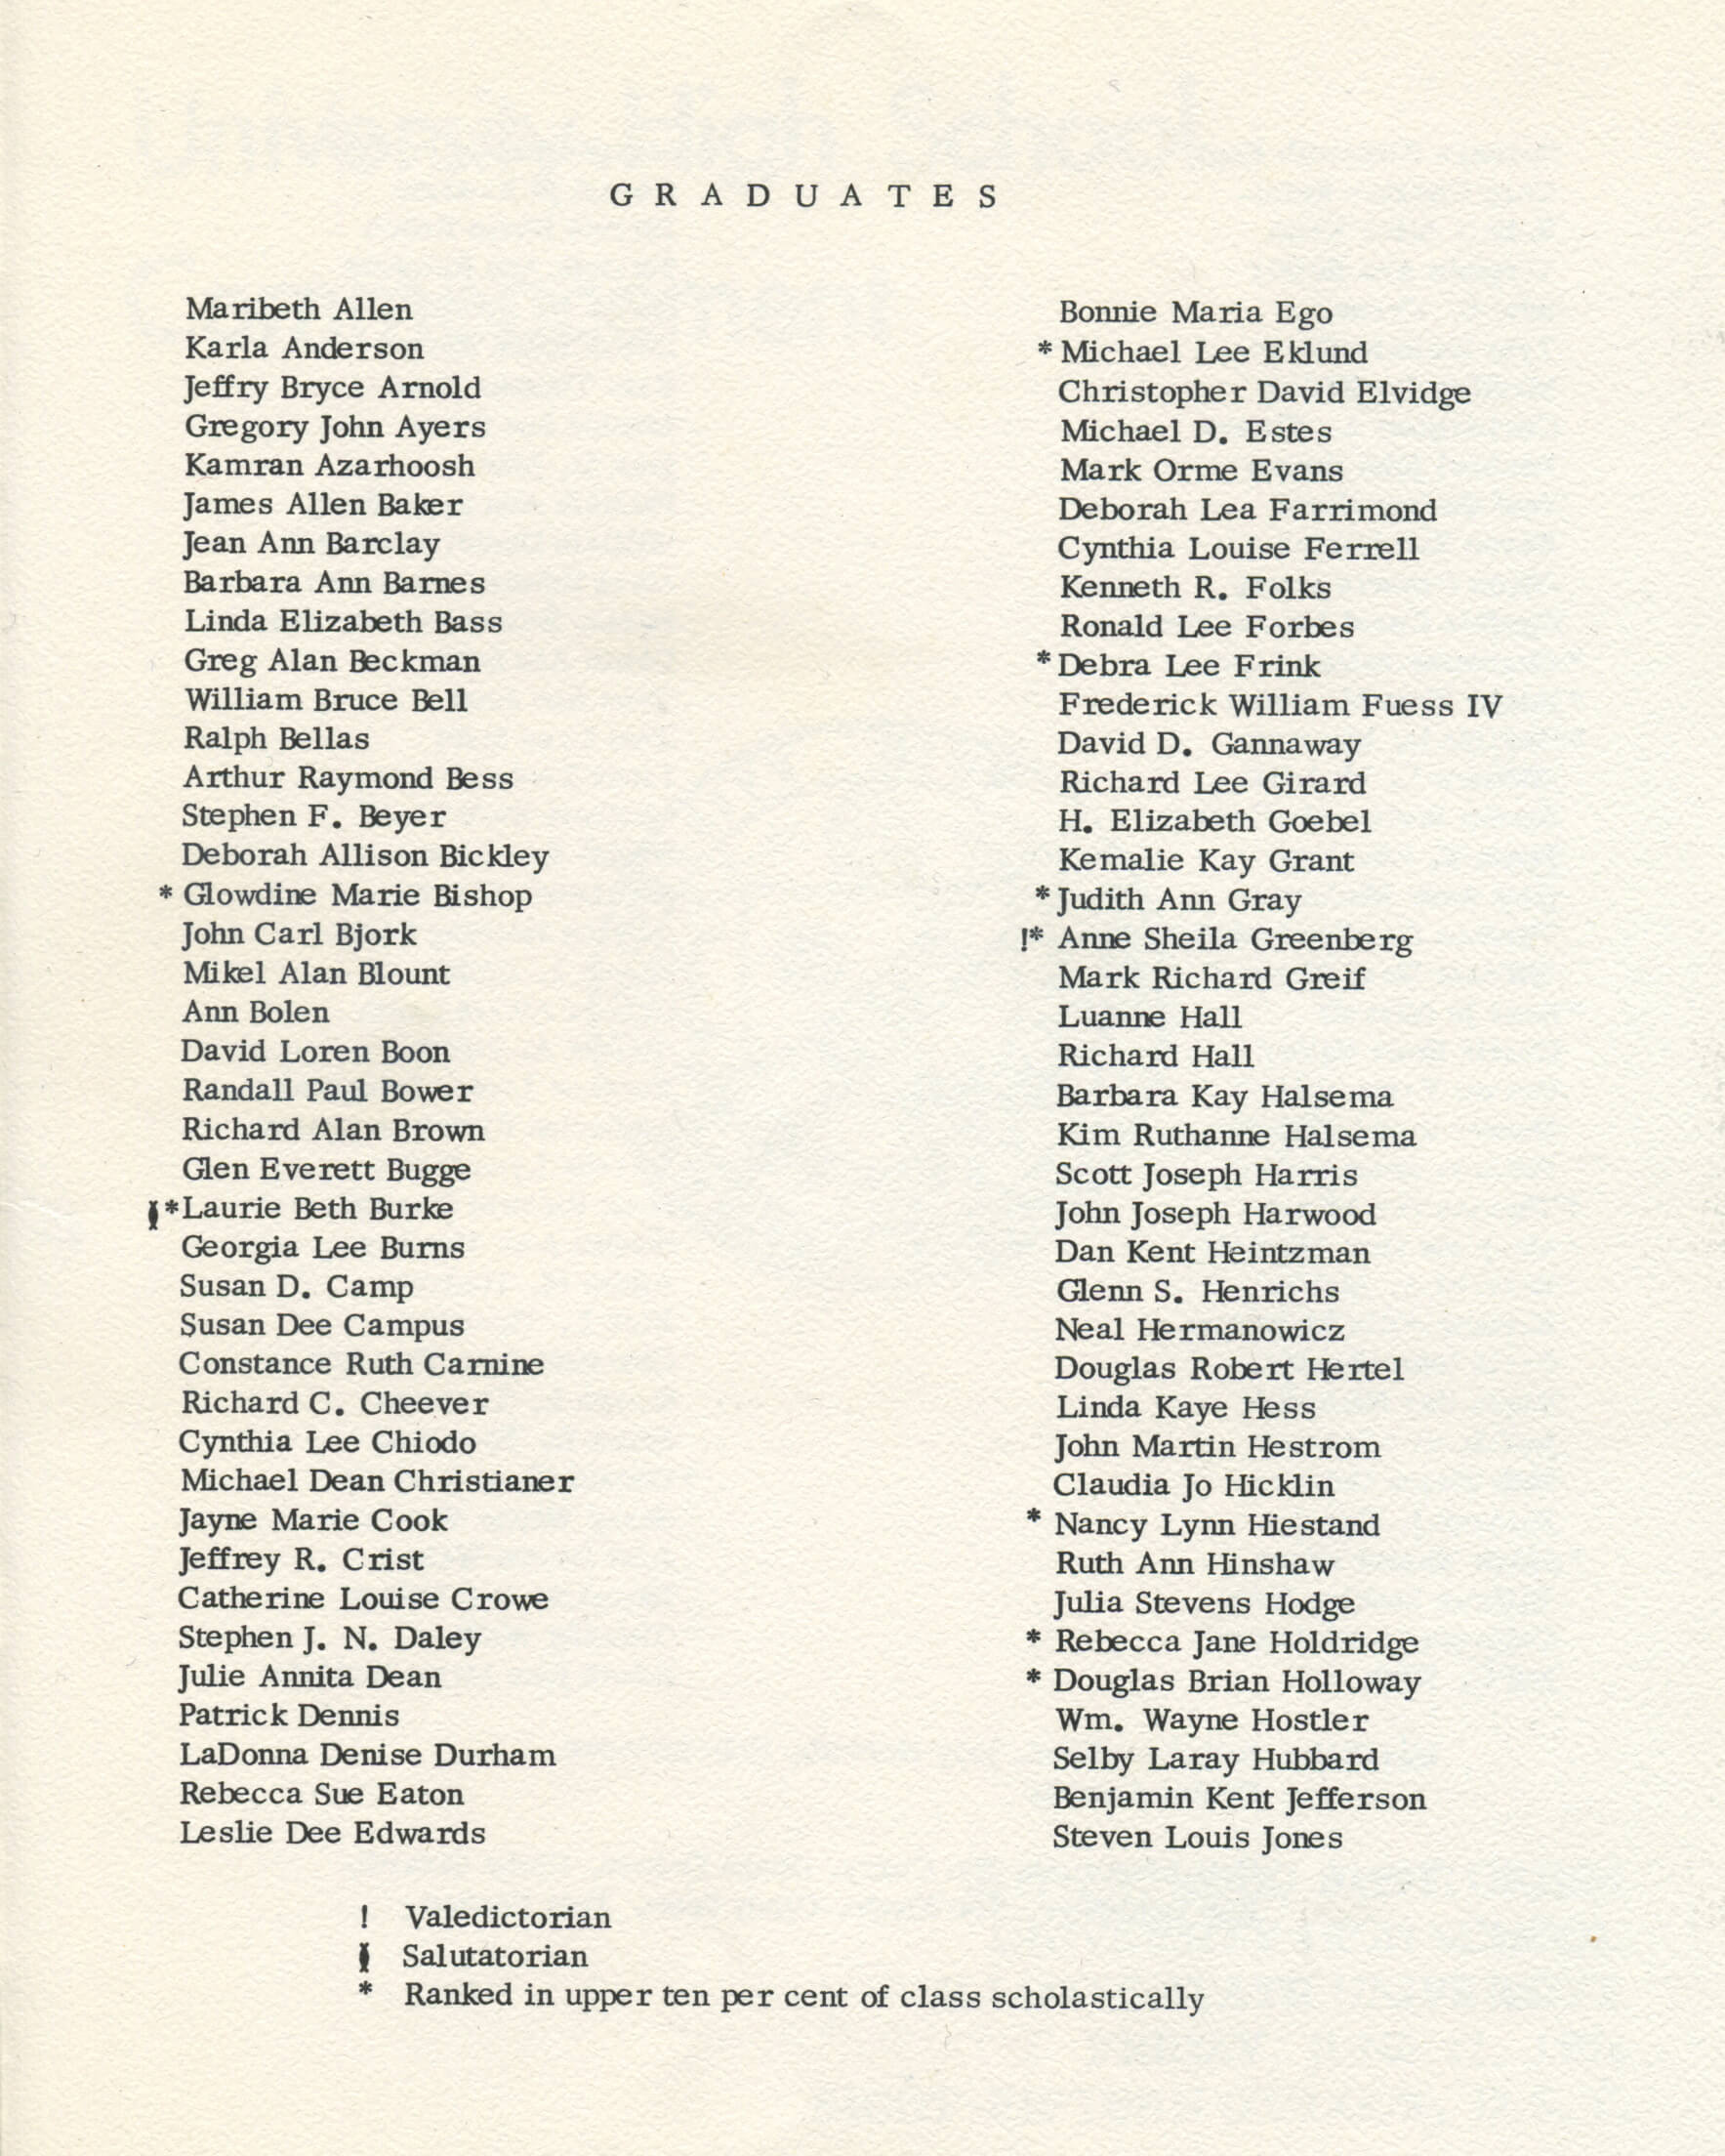 Commencement inside cover listing the graduates.